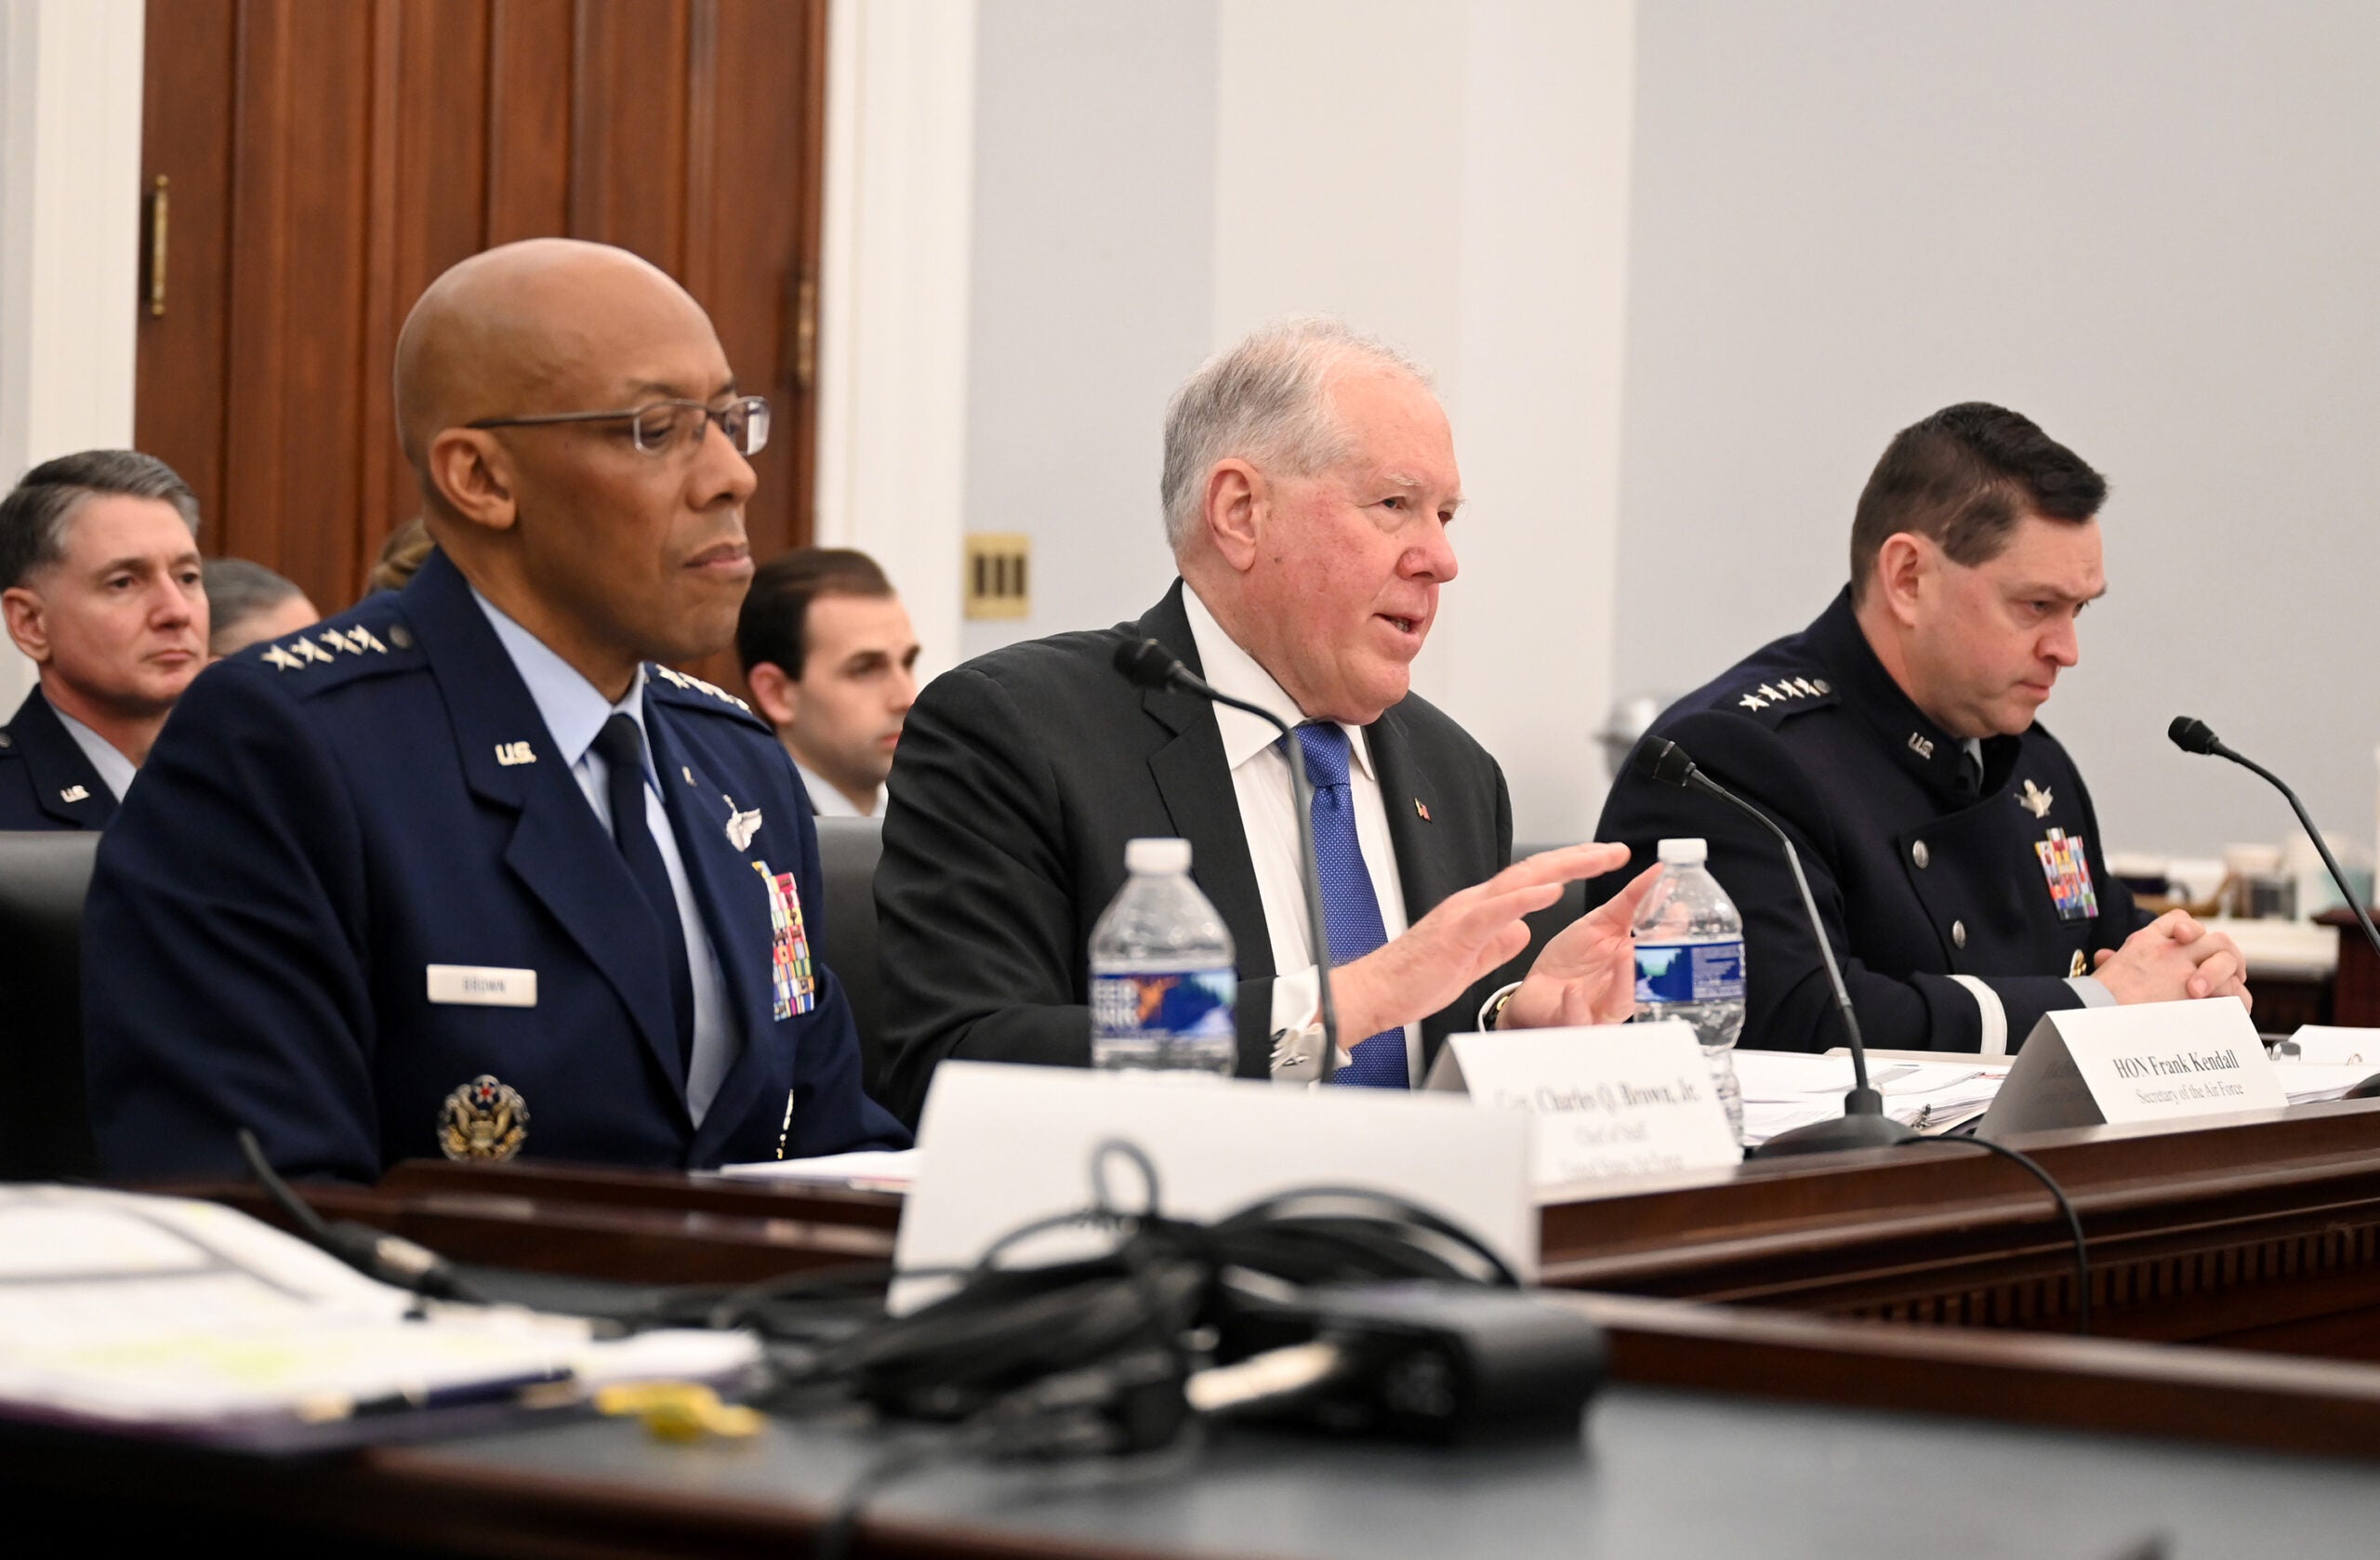 Secretary of the Air Force Frank Kendall (center) delivers testimony during a House Appropriations Committee hearing in the Capitol Building, Washington, D.C., March 28, 2023. (U.S. Air Force photo by Andy Morataya)